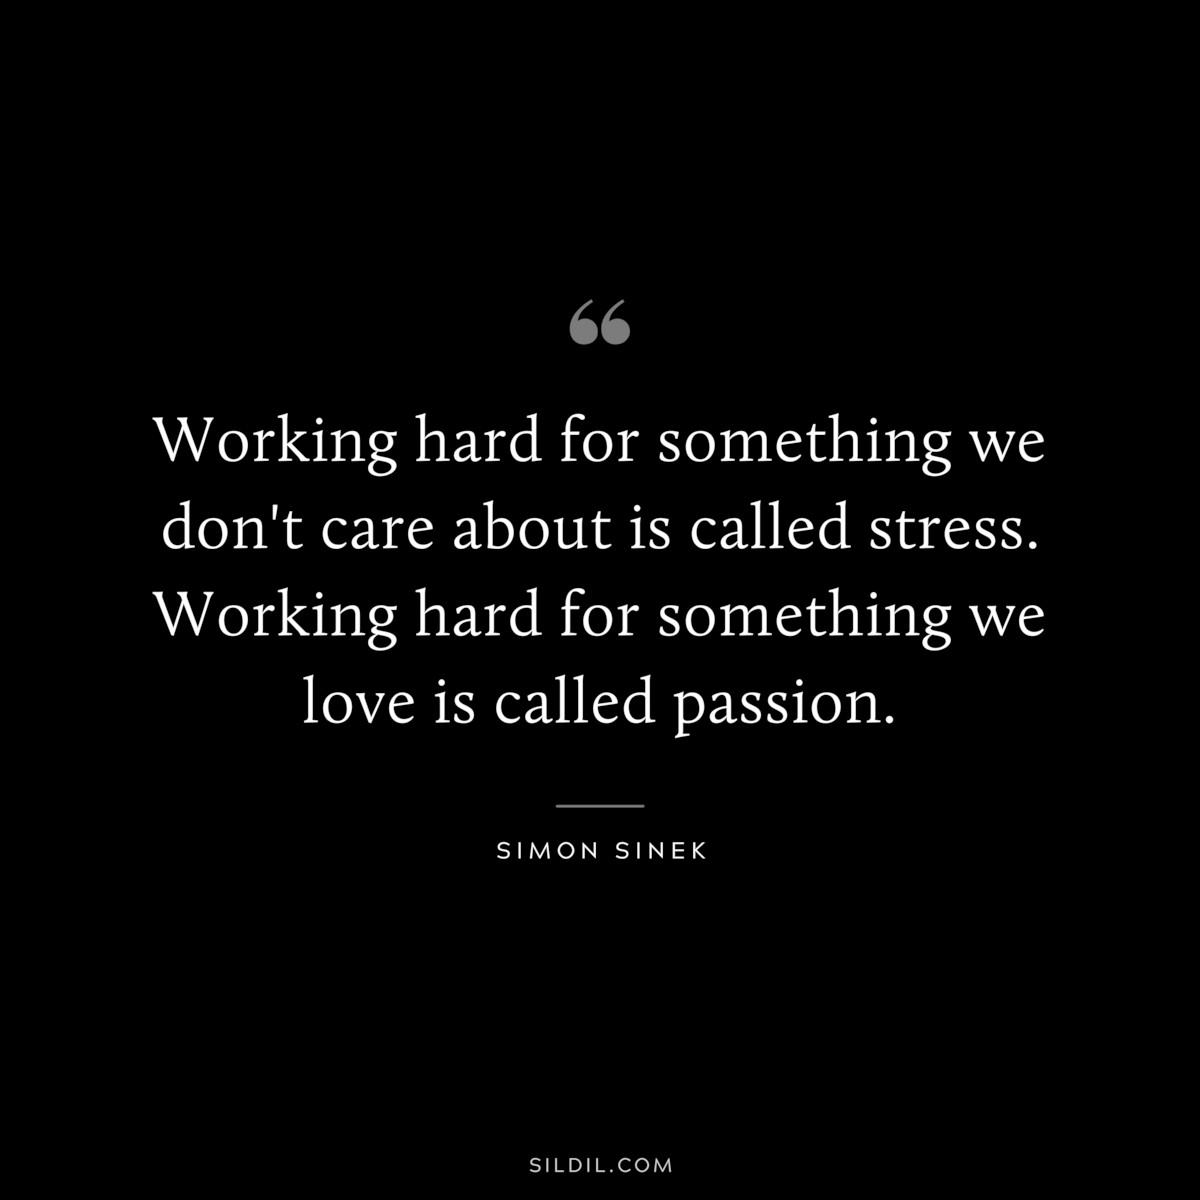 Working hard for something we don't care about is called stress. Working hard for something we love is called passion. ― Simon Sinek